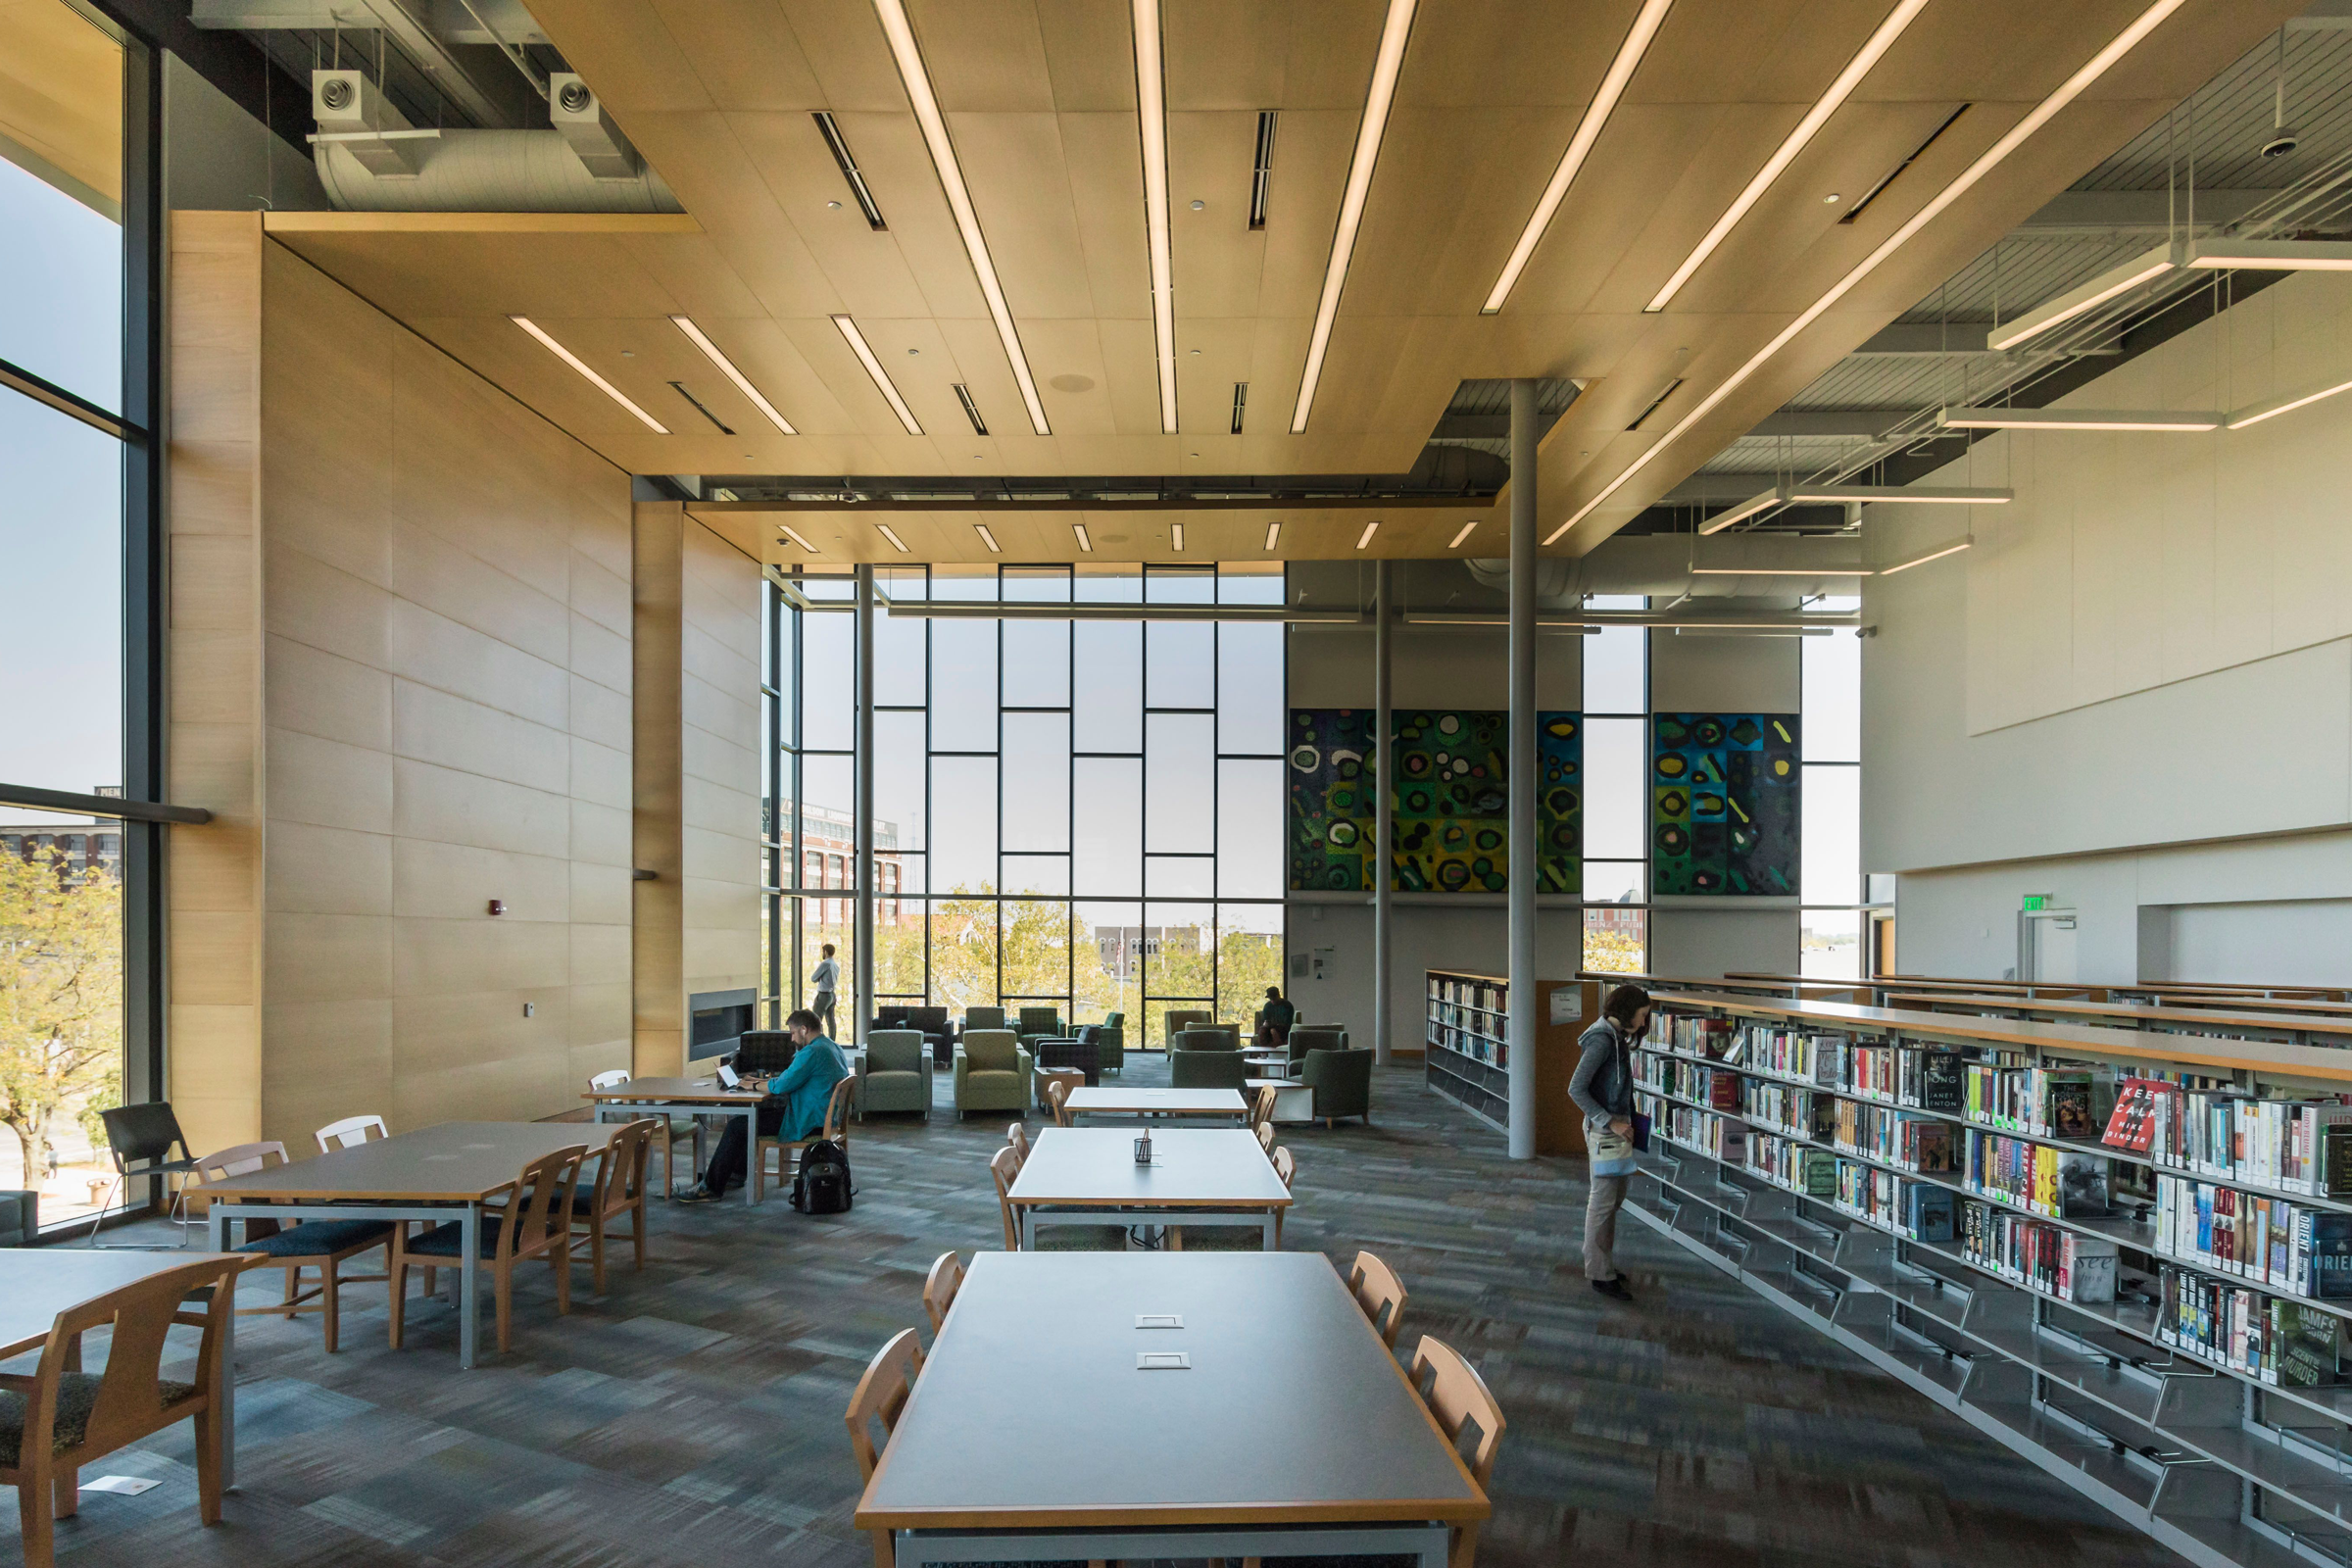 Dayton Metro Library: A Case Study in Building Sustainable, Equitable Public Spaces